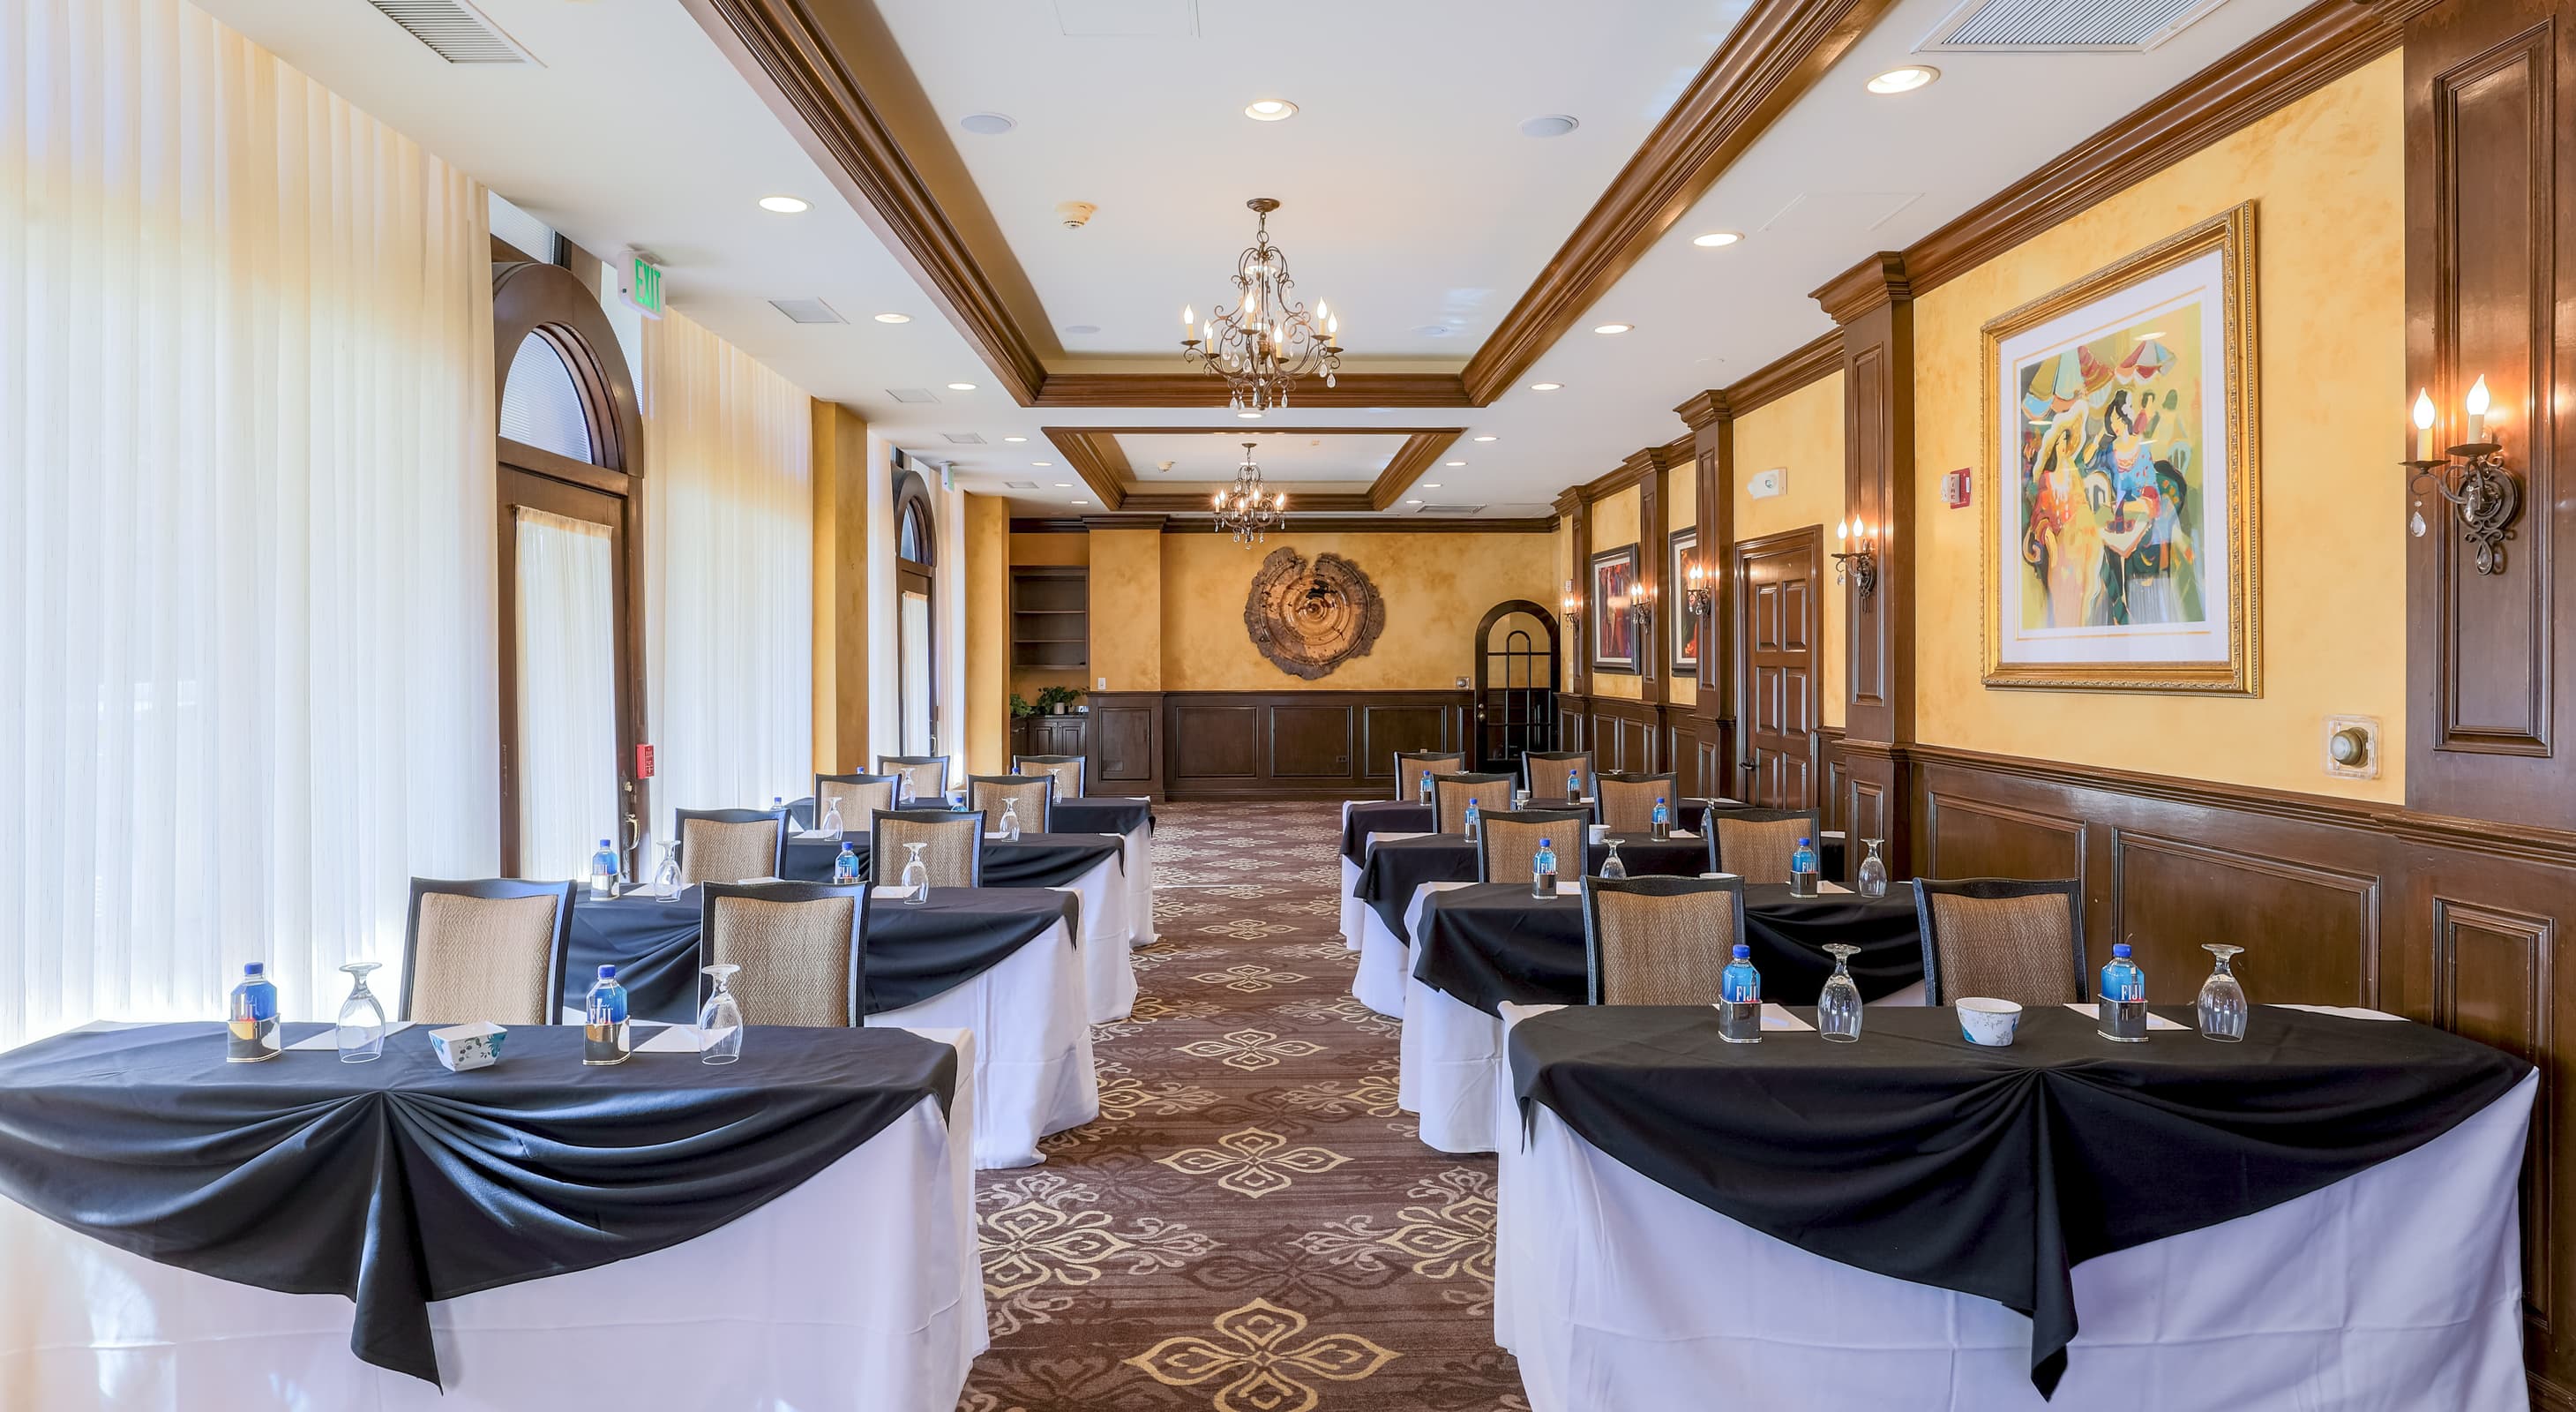 St. Charles room setup for a private business meeting at our event venue near Chicago, IL